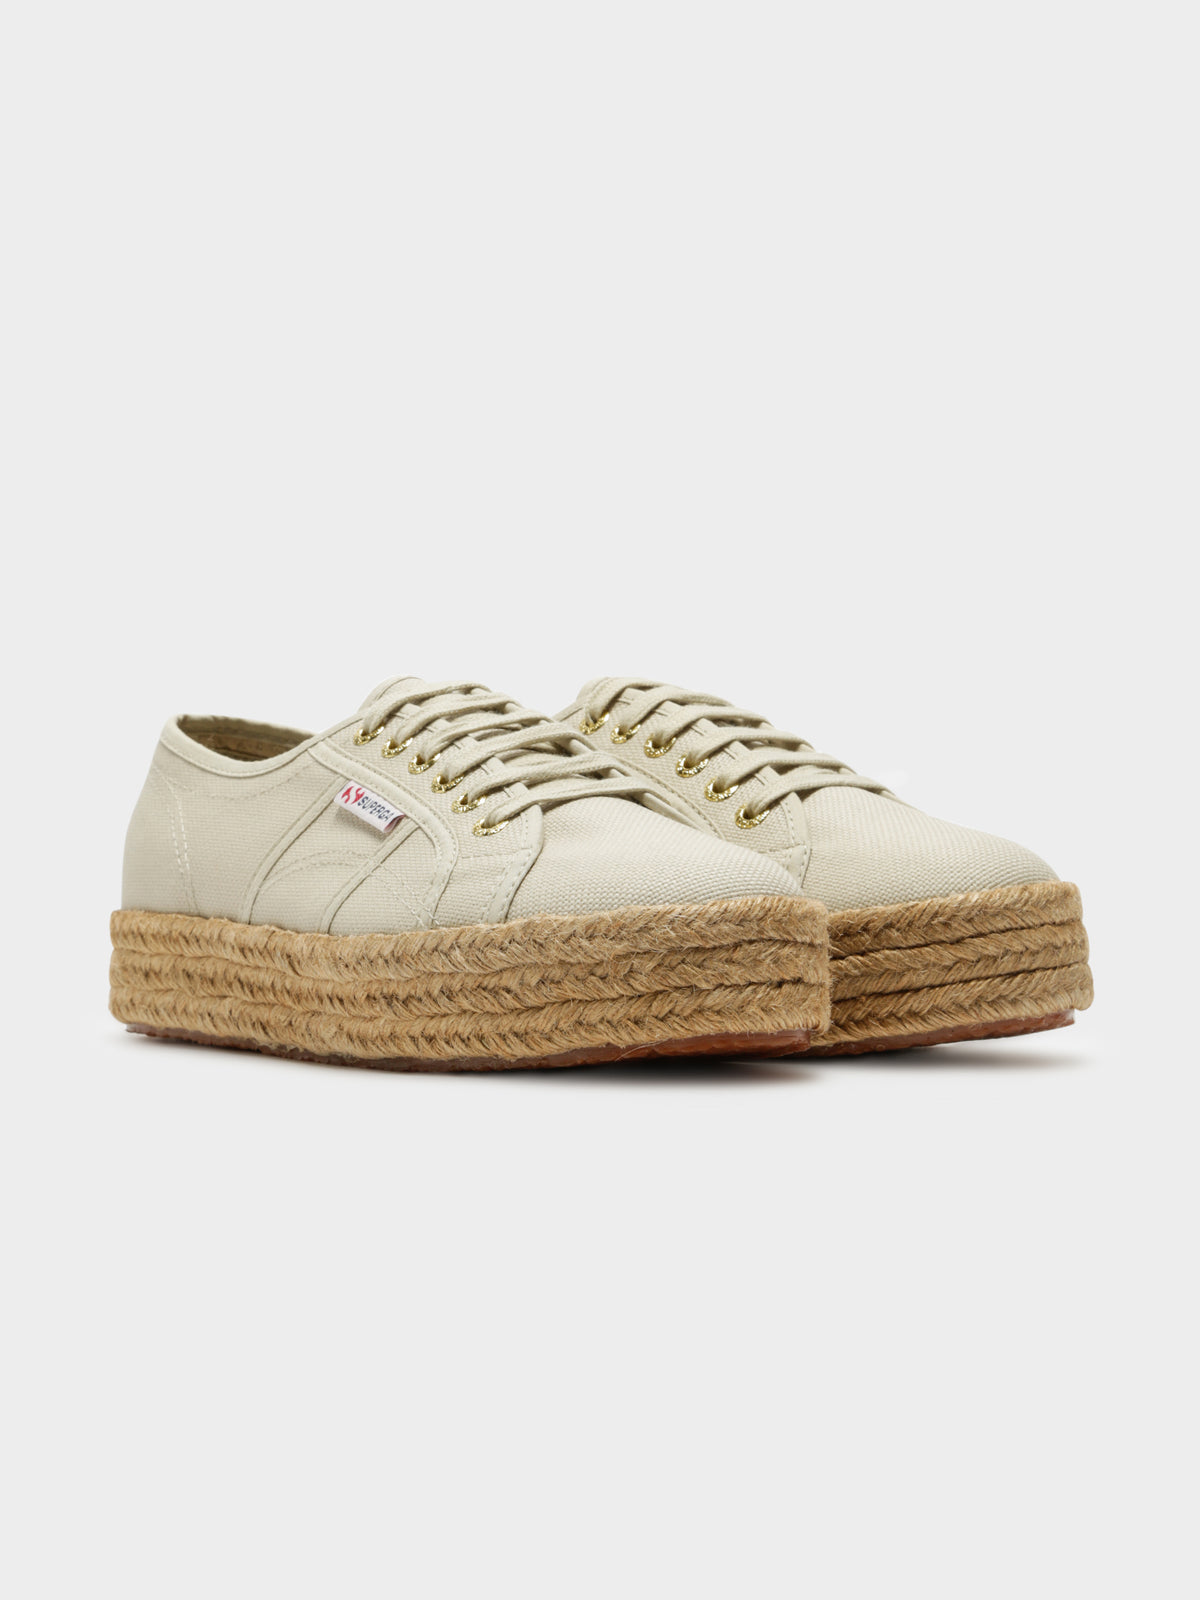 Womens 2730 Cotropew 94 Sneakers in Taupe